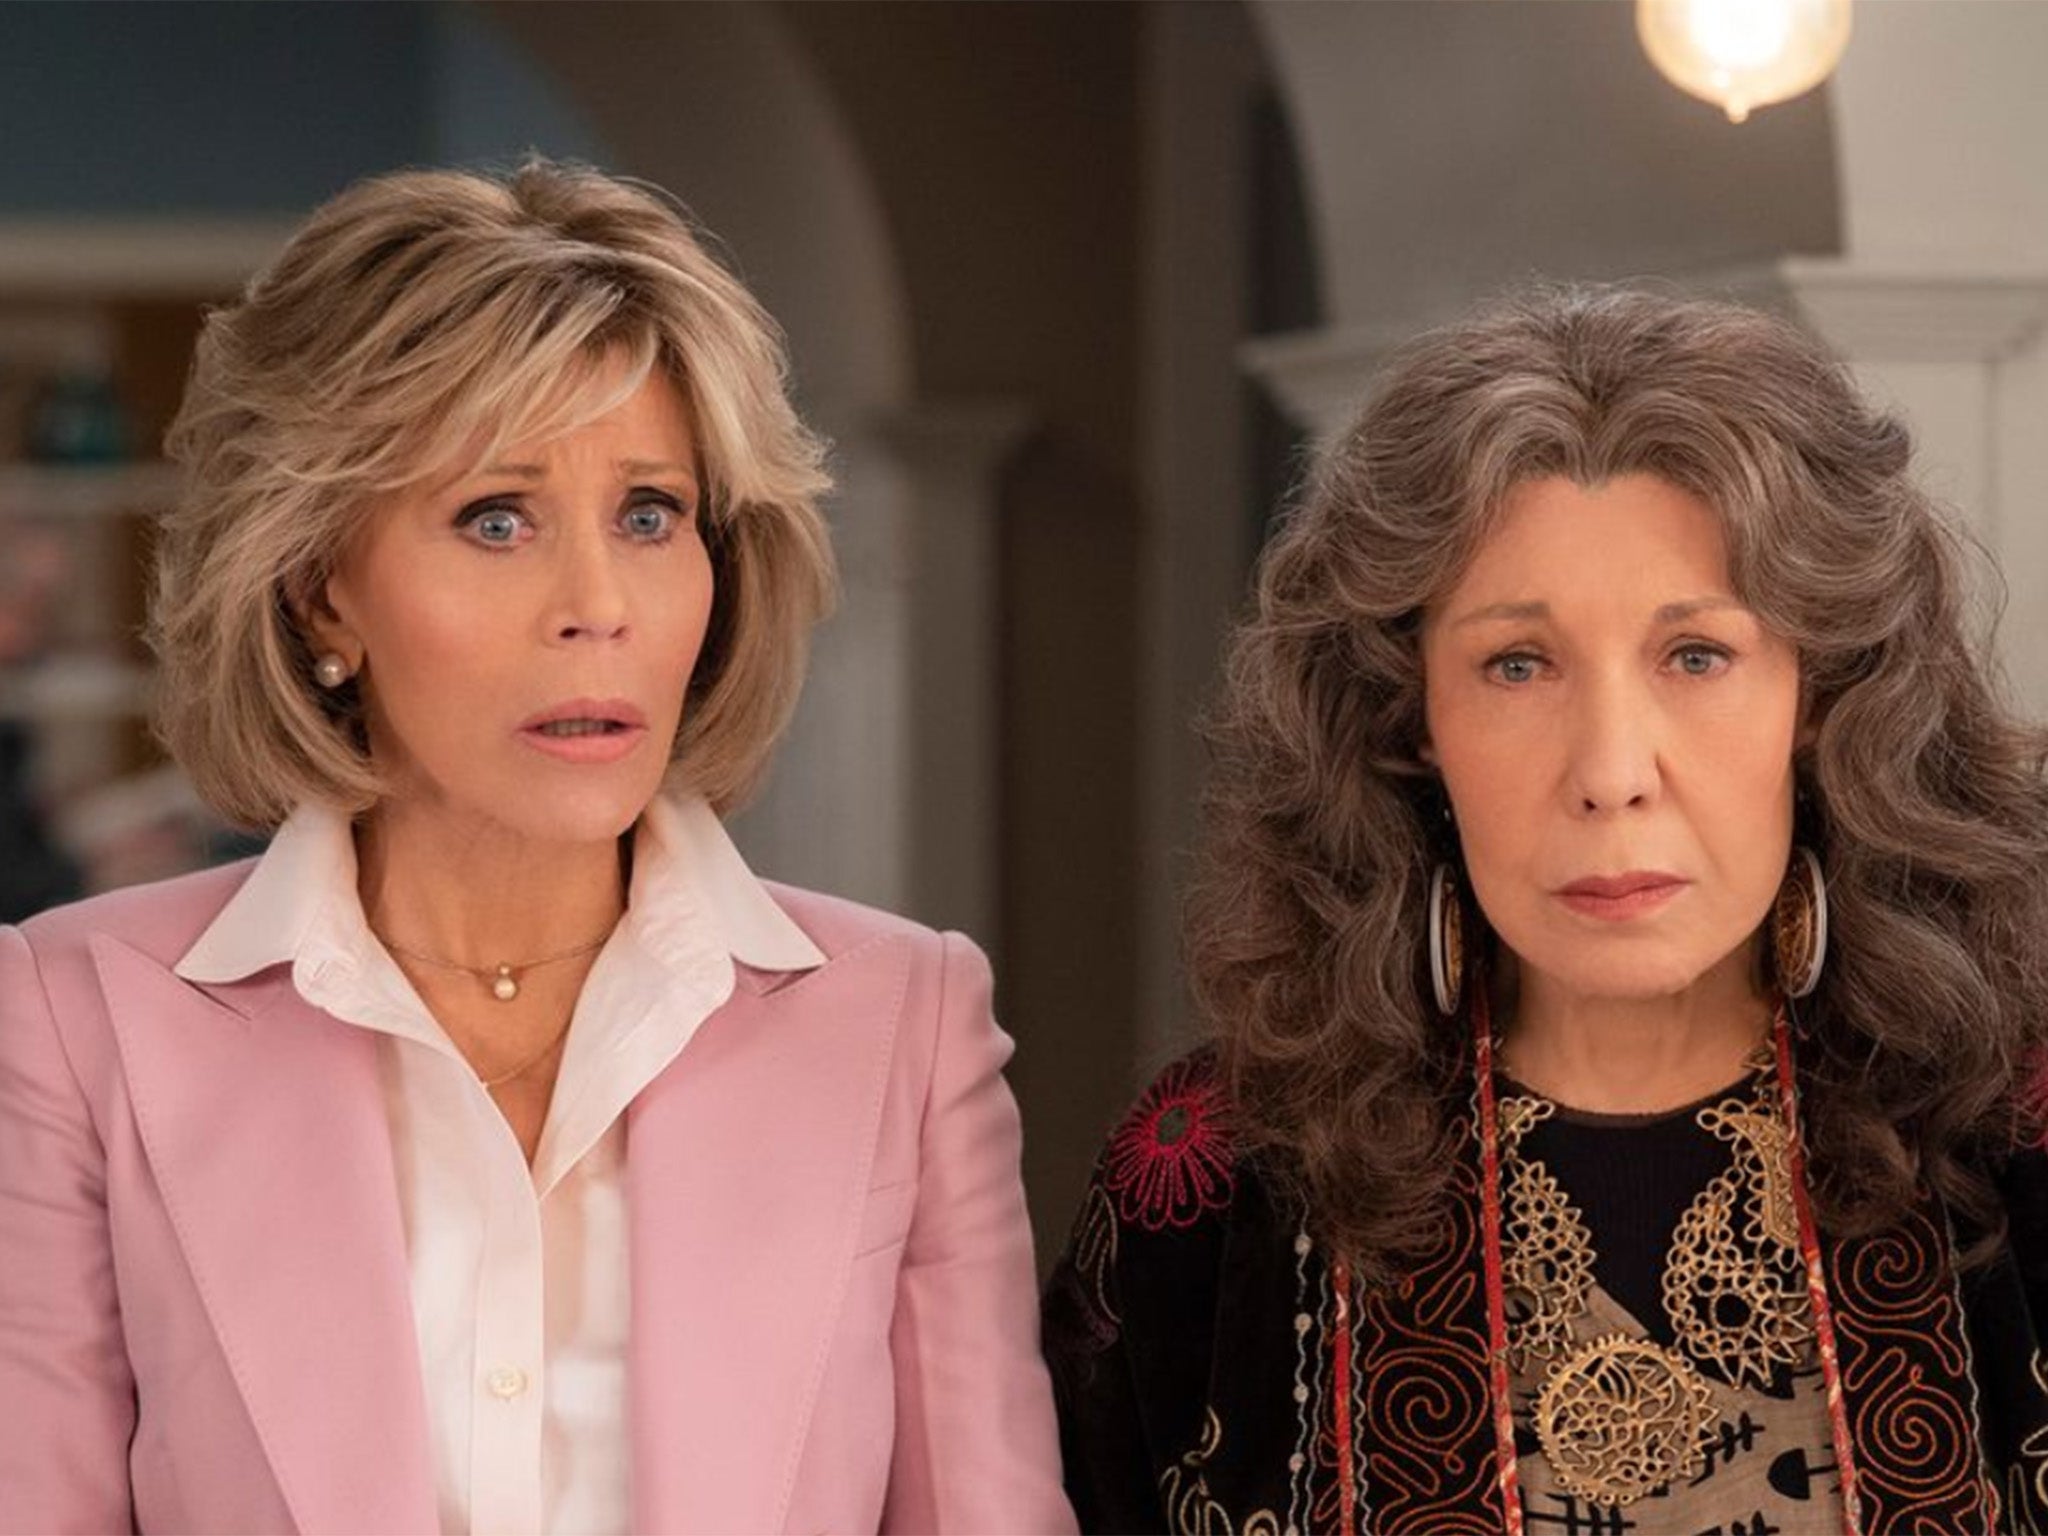 Her religion prevented Jane Fonda from delivering one line in ‘Grace and Frankie’